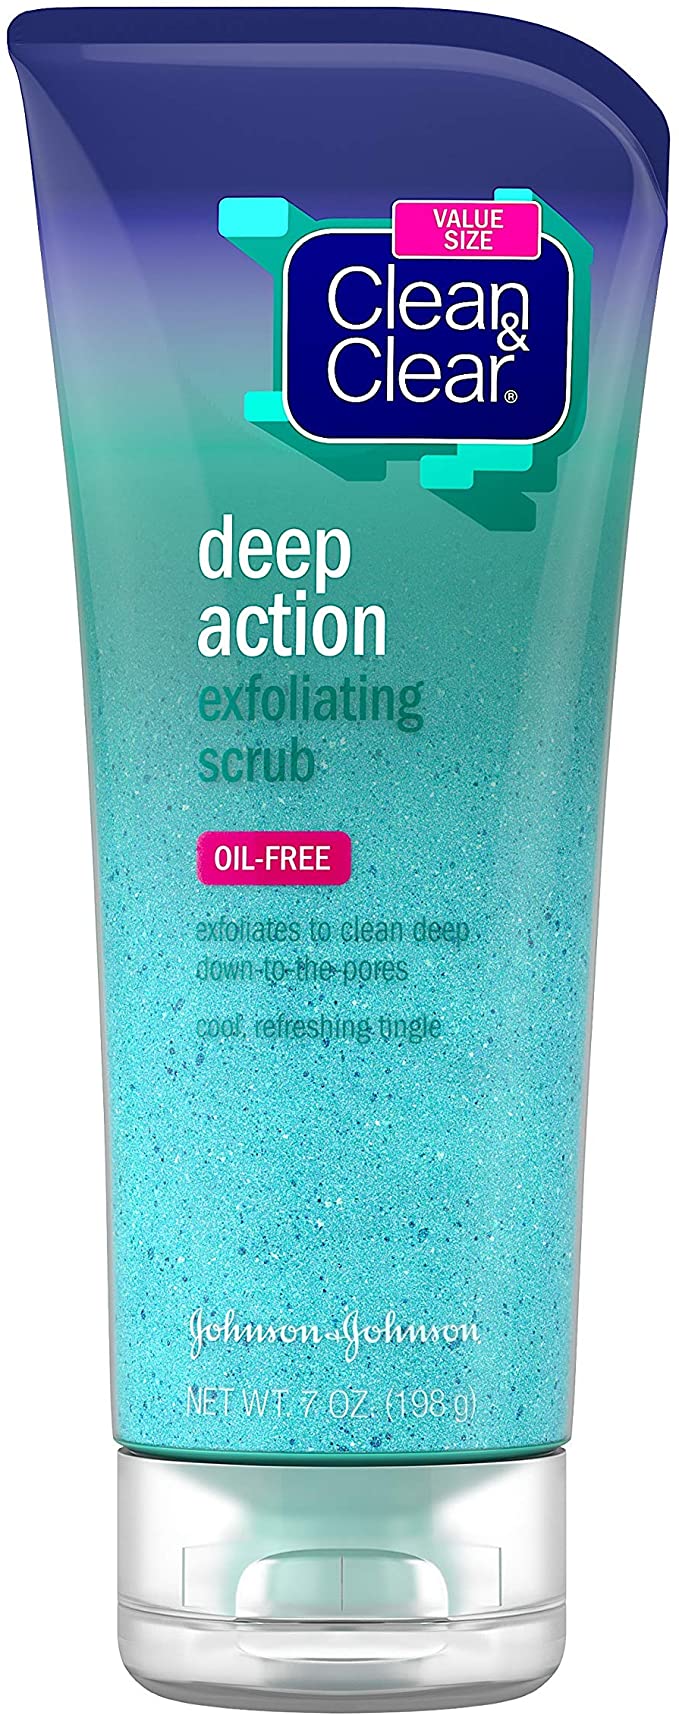 CLEAN & CLEAR Oil-Free Deep Action Exfoliating Facial Scrub, Cooling Face Wash for Deep Pore Cleansing, Daily Facial Cleanser, Face Wash for Oily Skin, Acne Scrub, 7 oz.